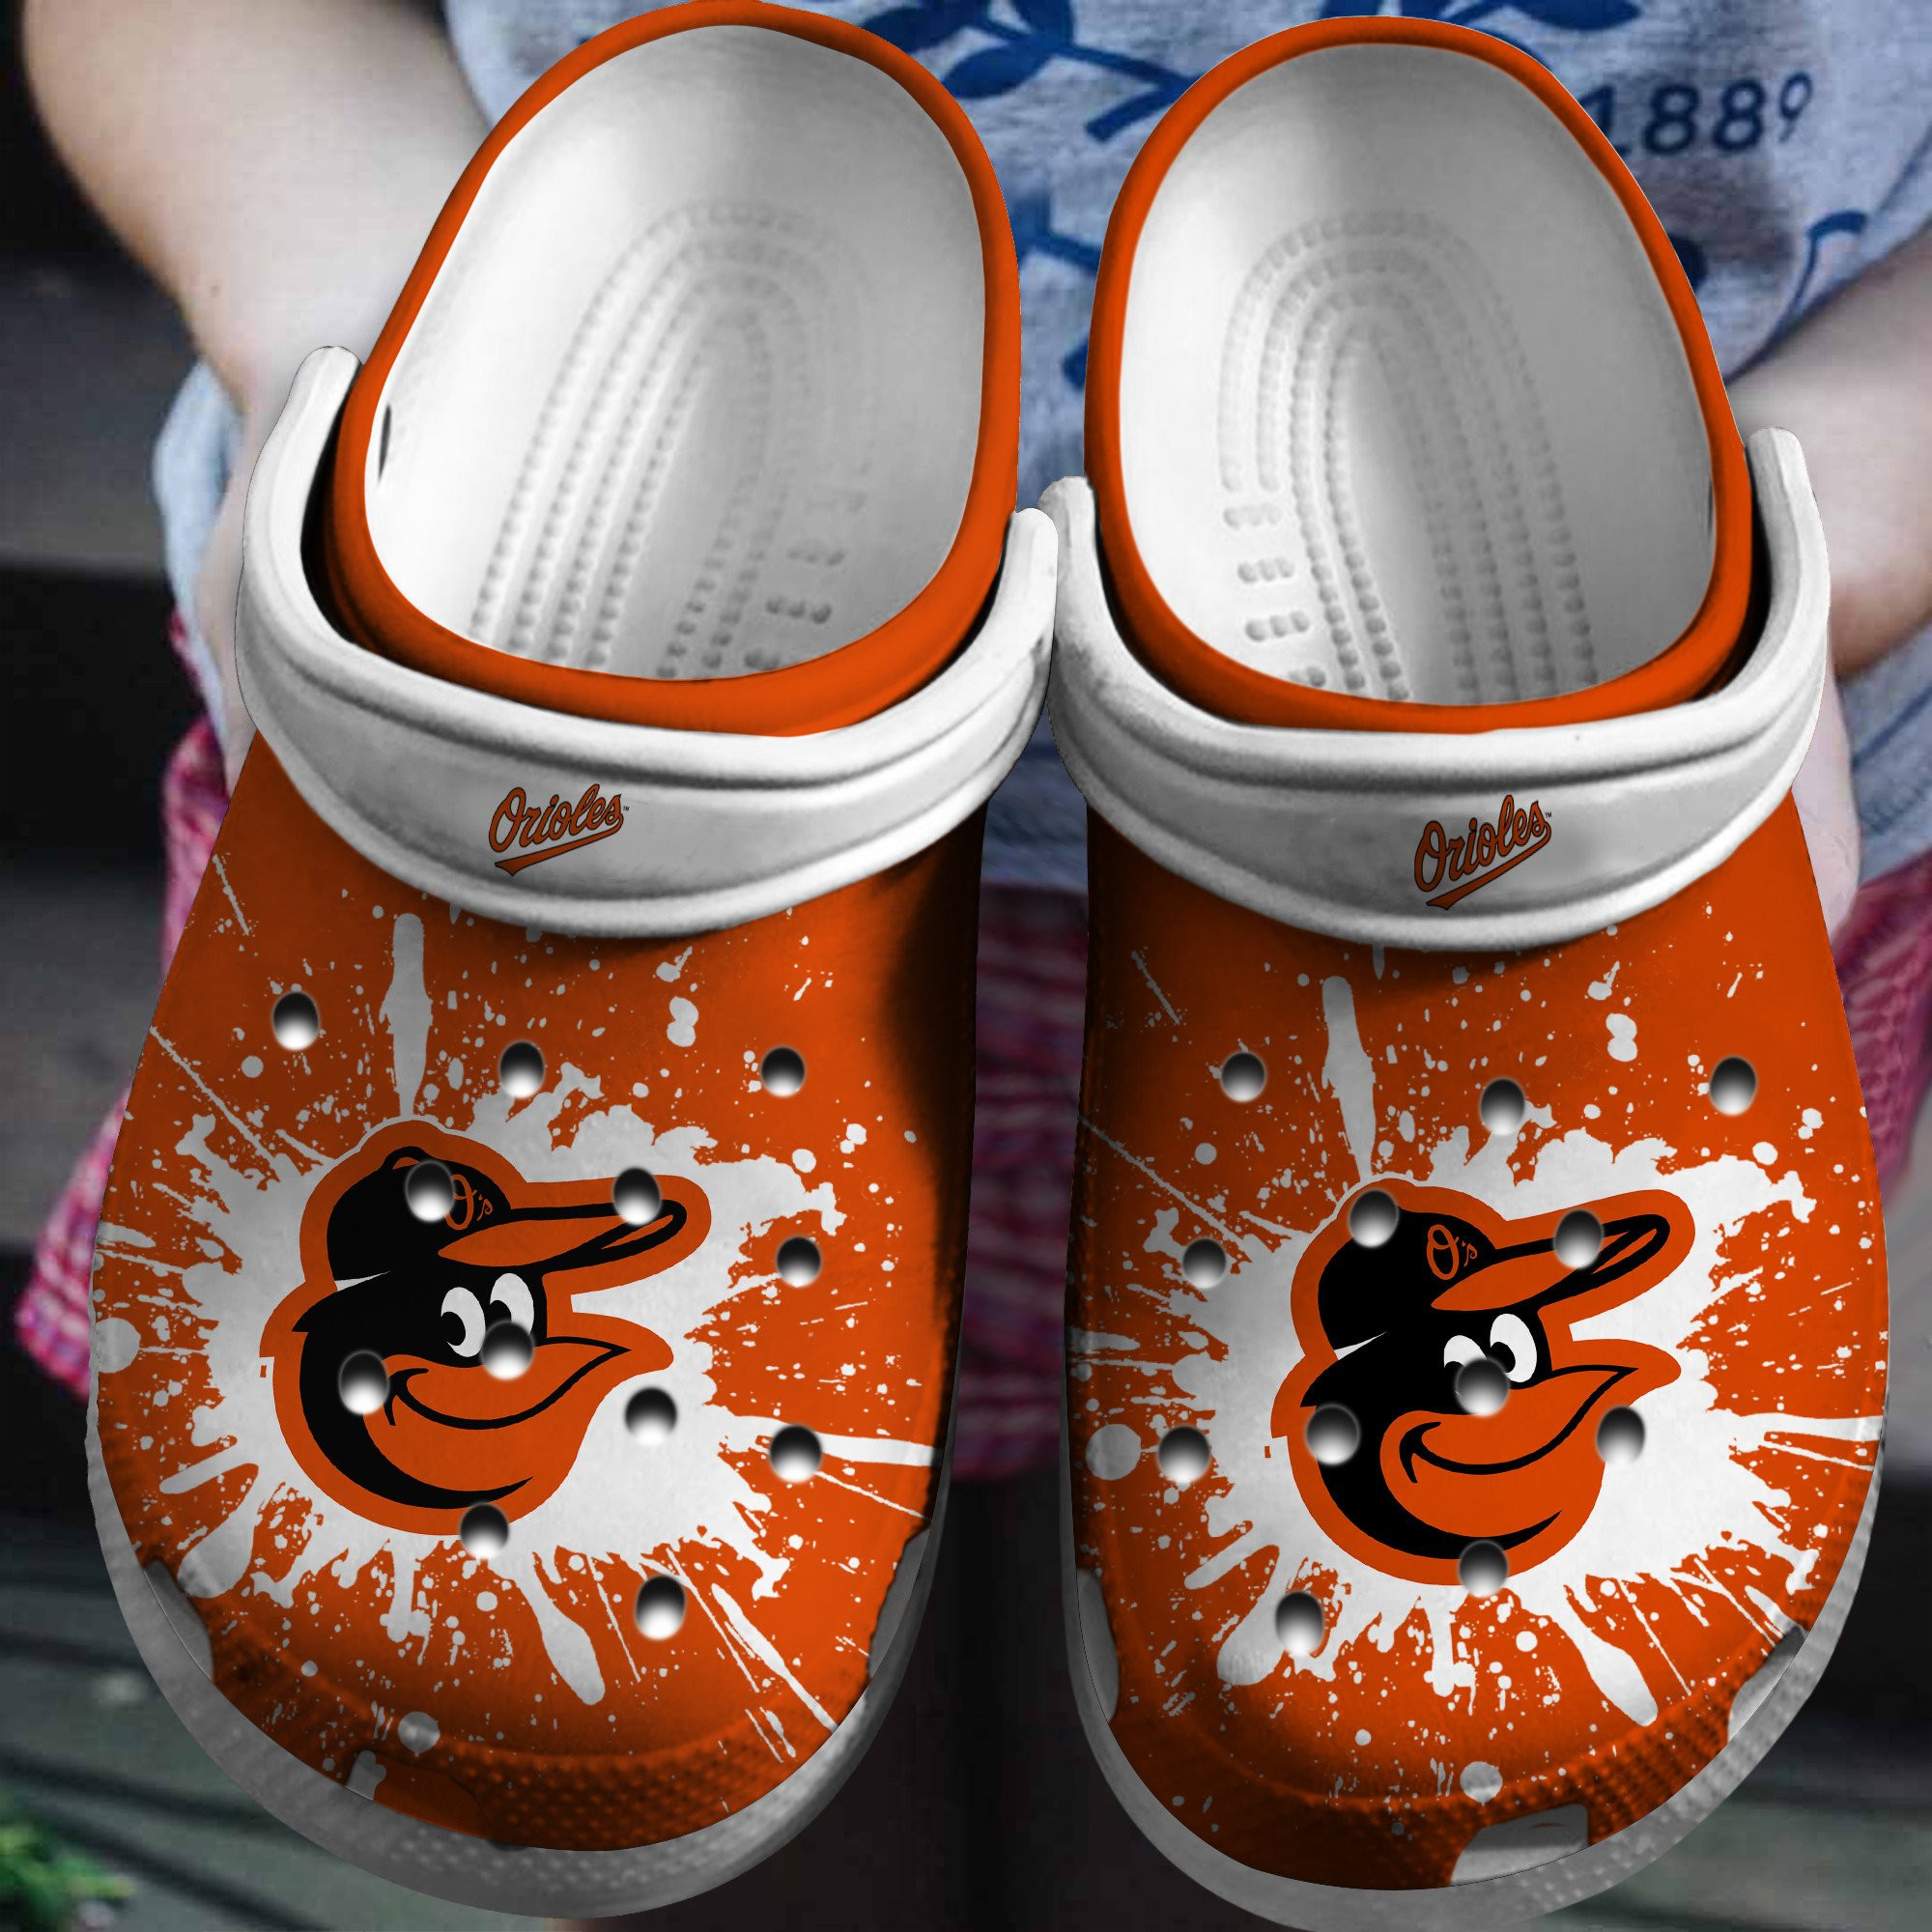 Hot Mlb Team Baltimore Orioles Orange-White Crocs Clog Shoesshoes Trusted Shopping Online In The World